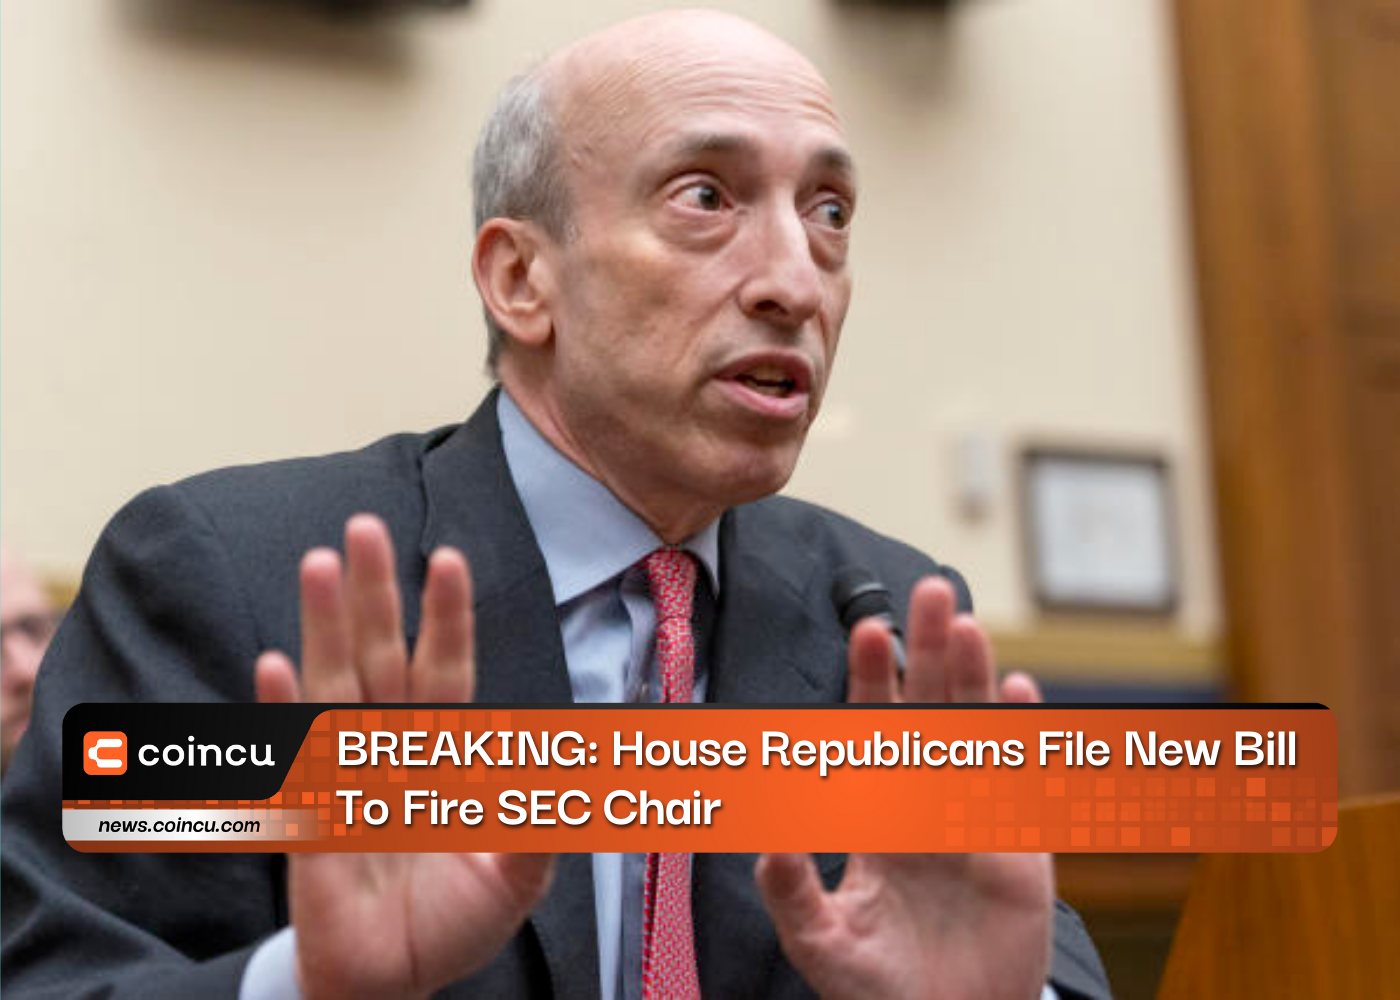 BREAKING: House Republicans File New Bill To Fire SEC Chair